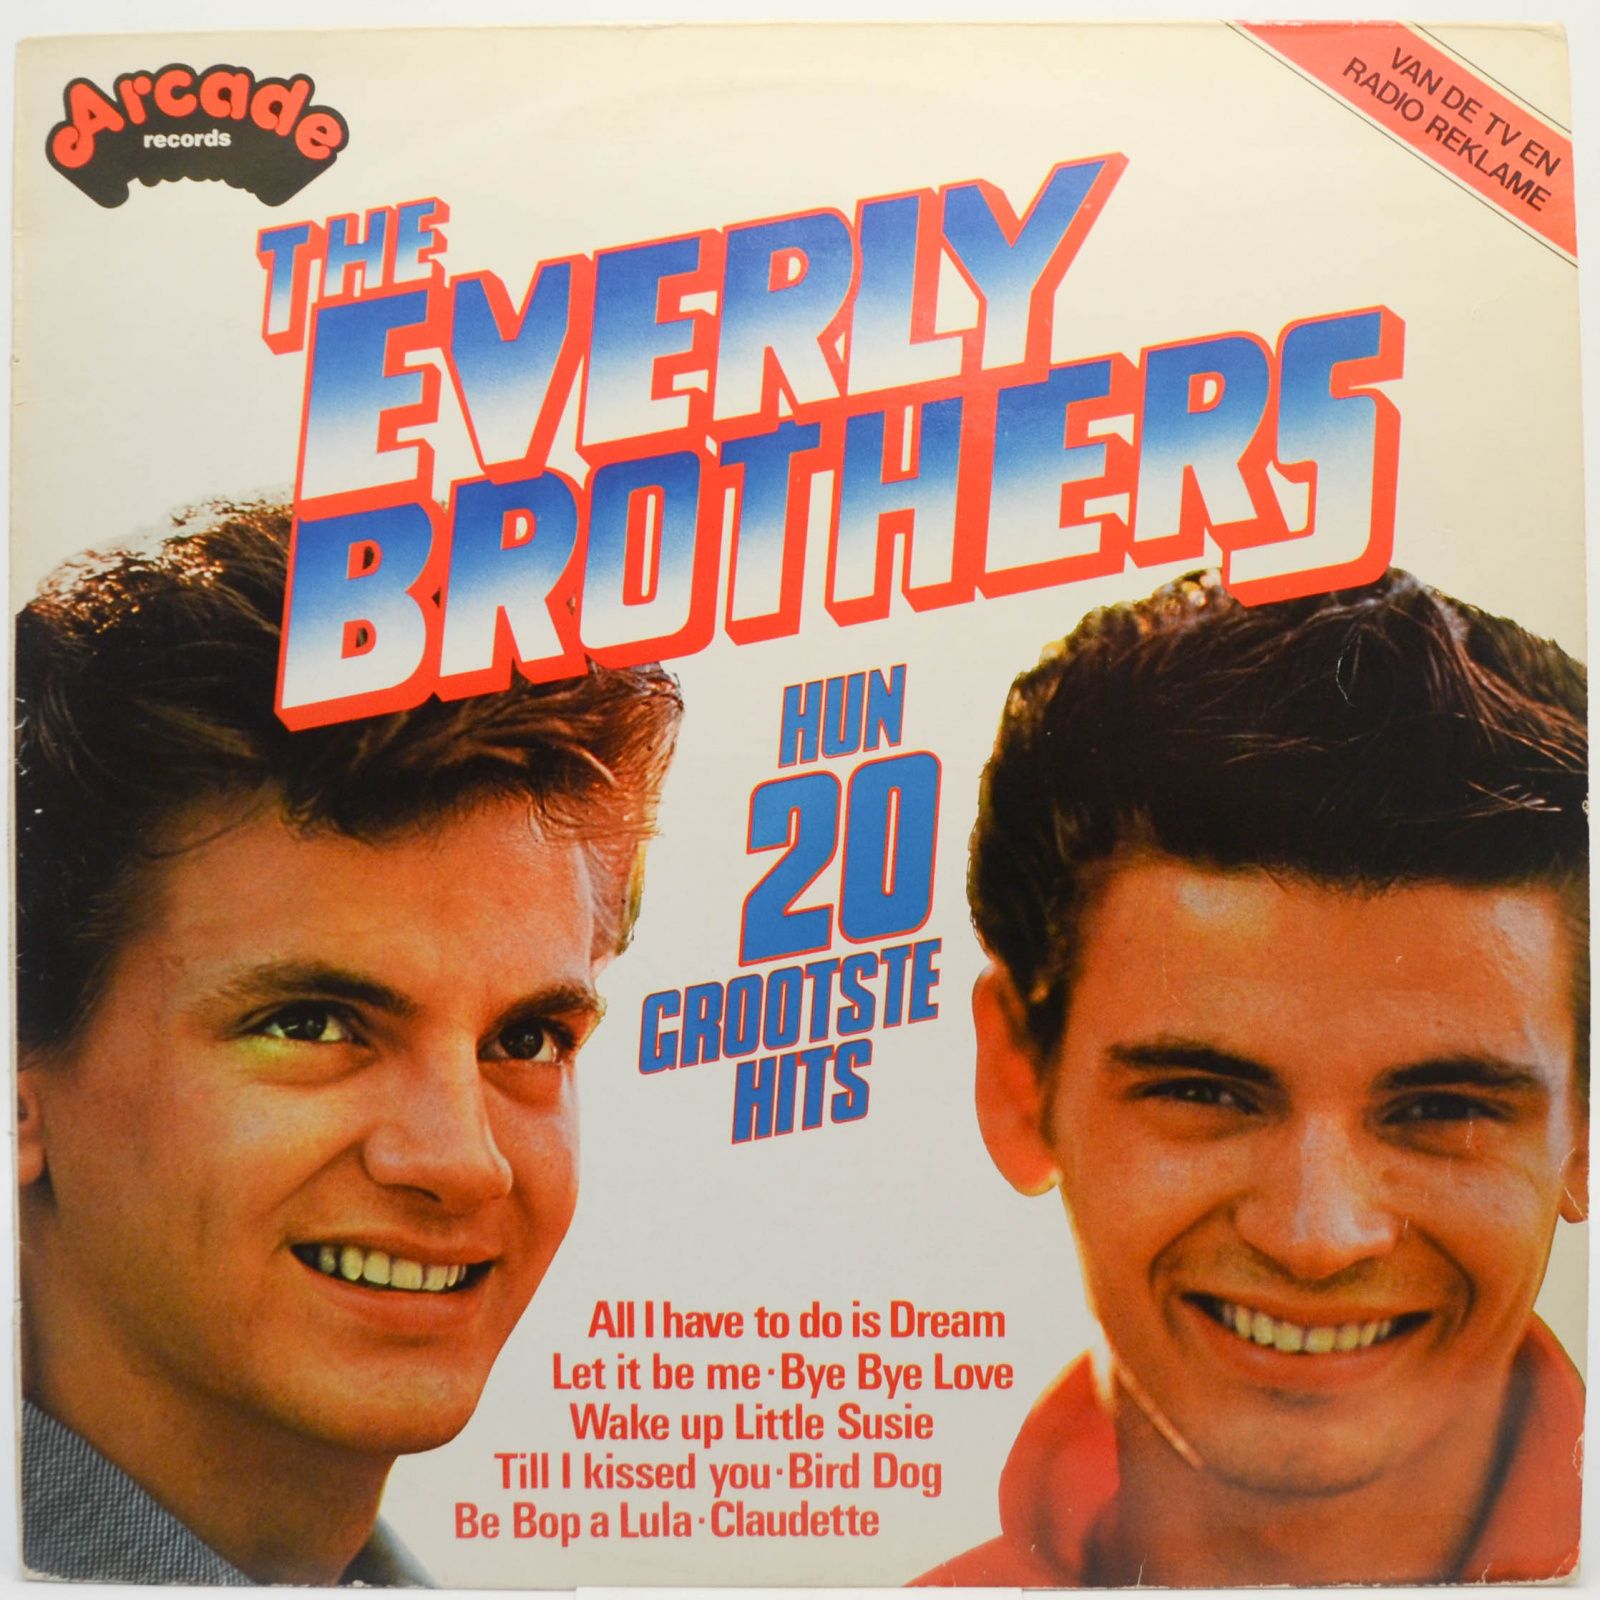 Everly Brothers — Hun 20 Grootste Hits, 1977